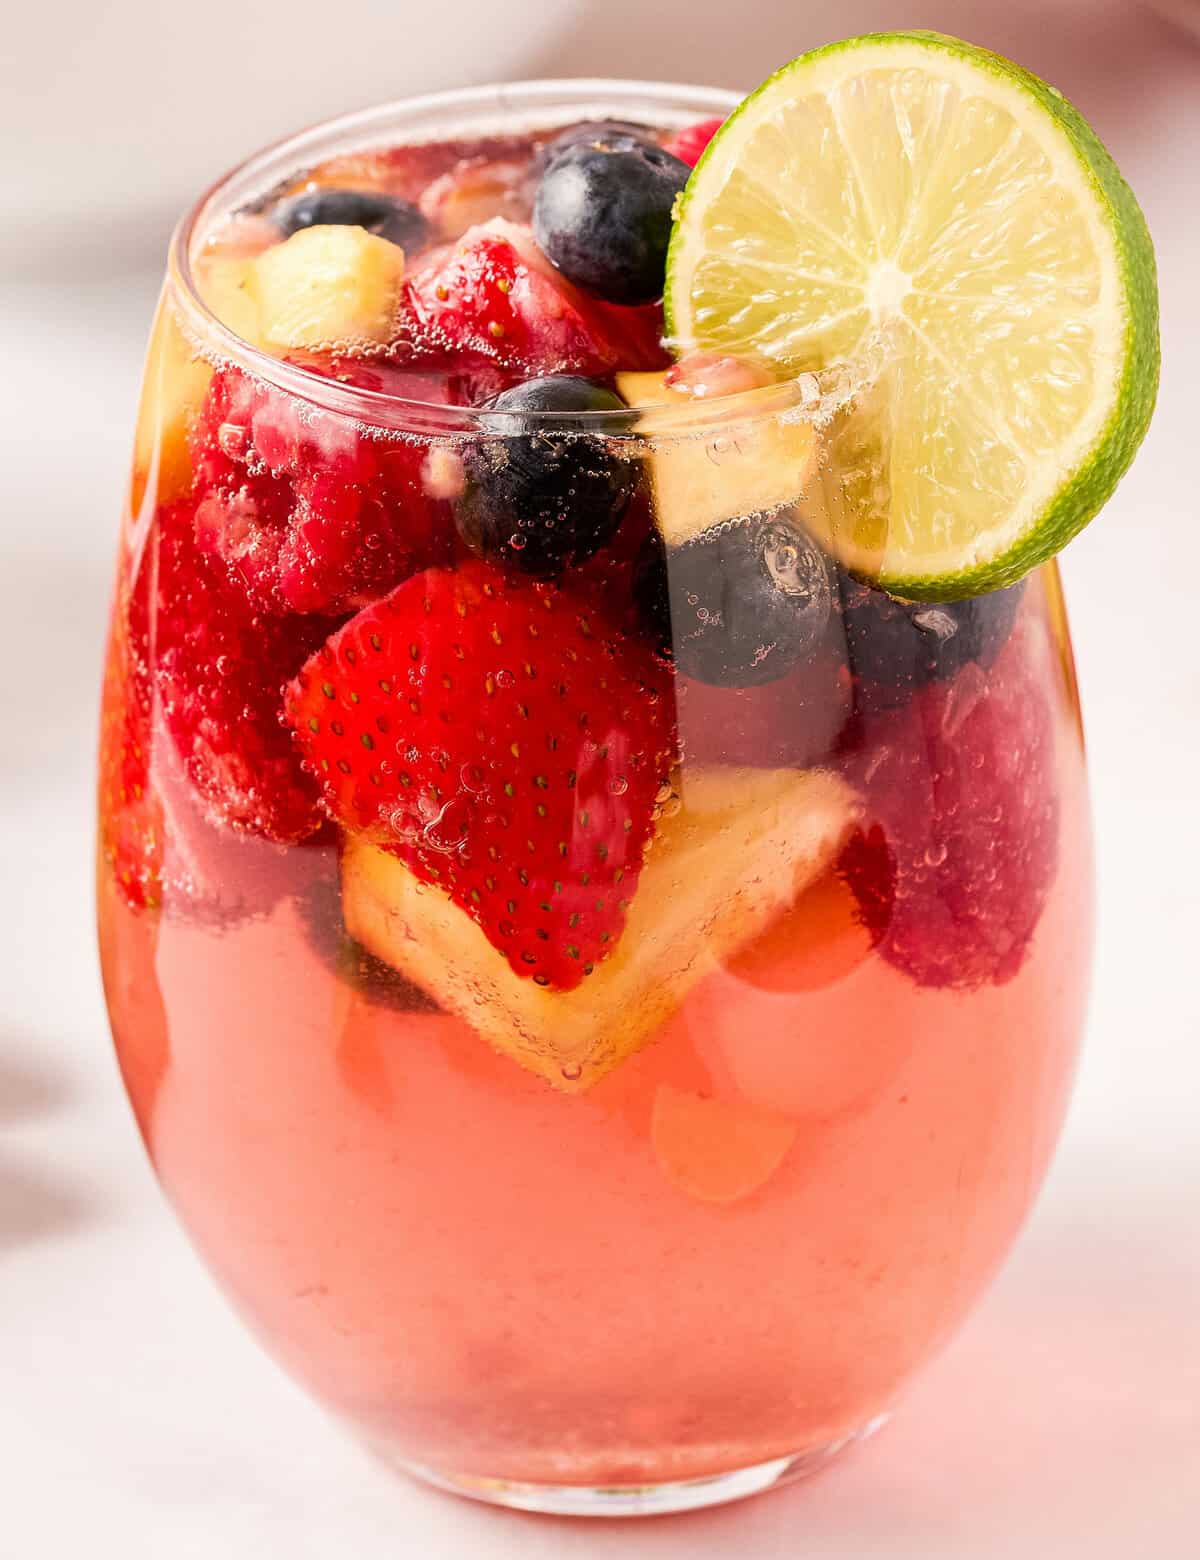 https://www.thechunkychef.com/wp-content/uploads/2022/08/Sweet-Moscato-Sangria-feat.jpg